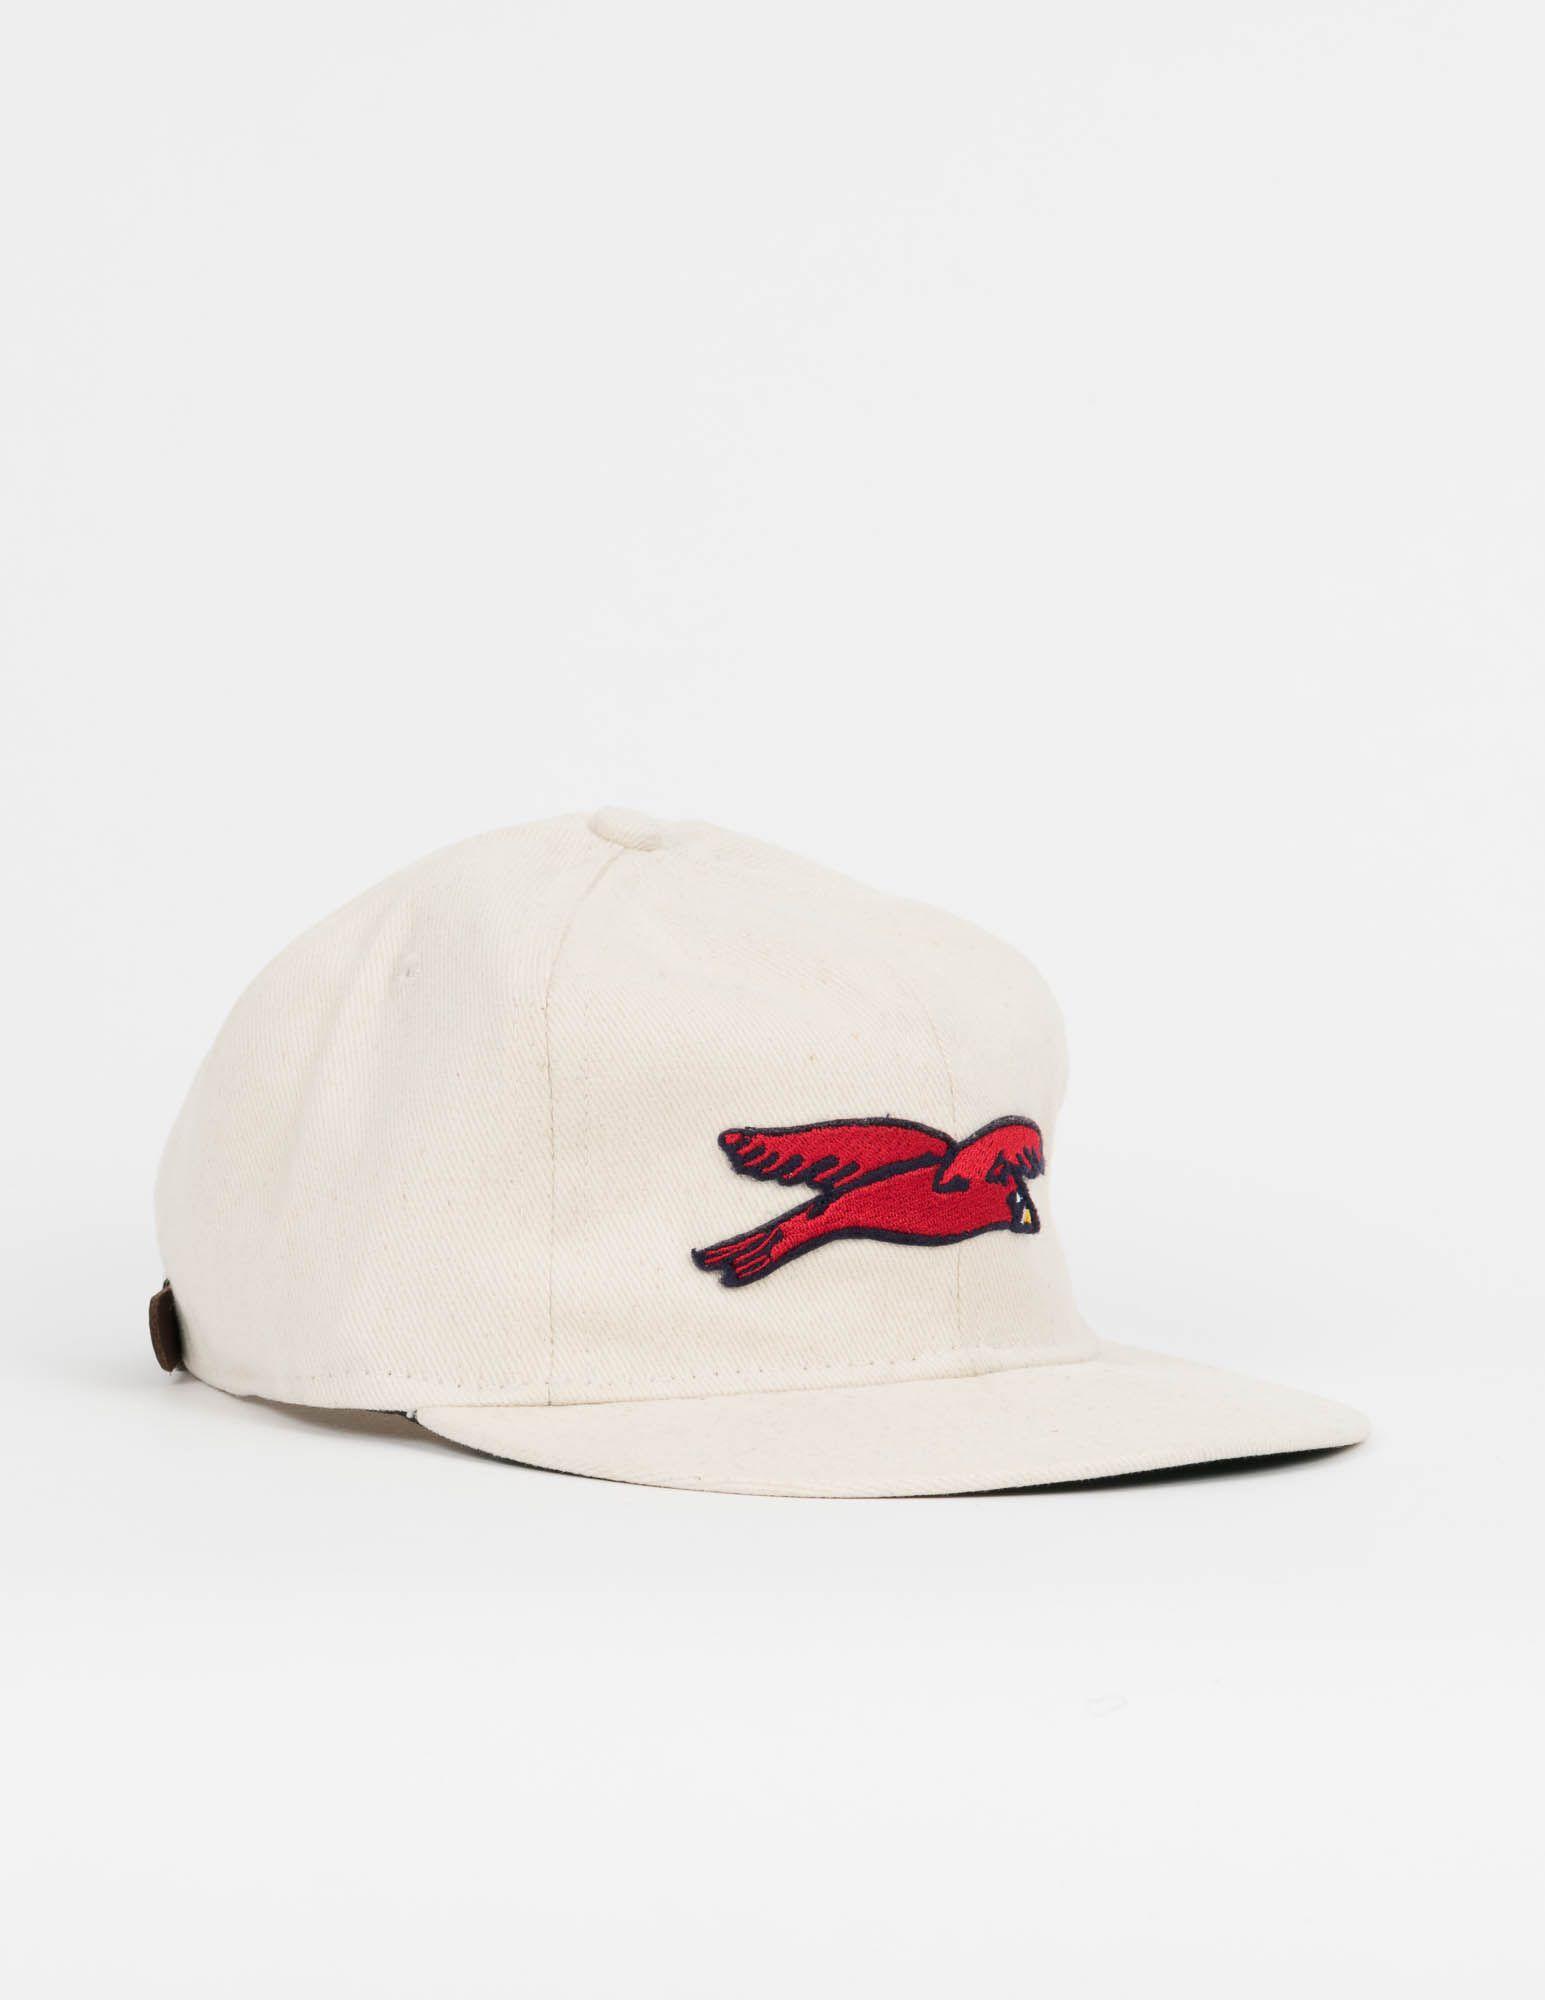 Columbus Red Birds Logo - Ebbets Field Flannels Columbus Red Birds 1937 Brushed Chino Twill ...